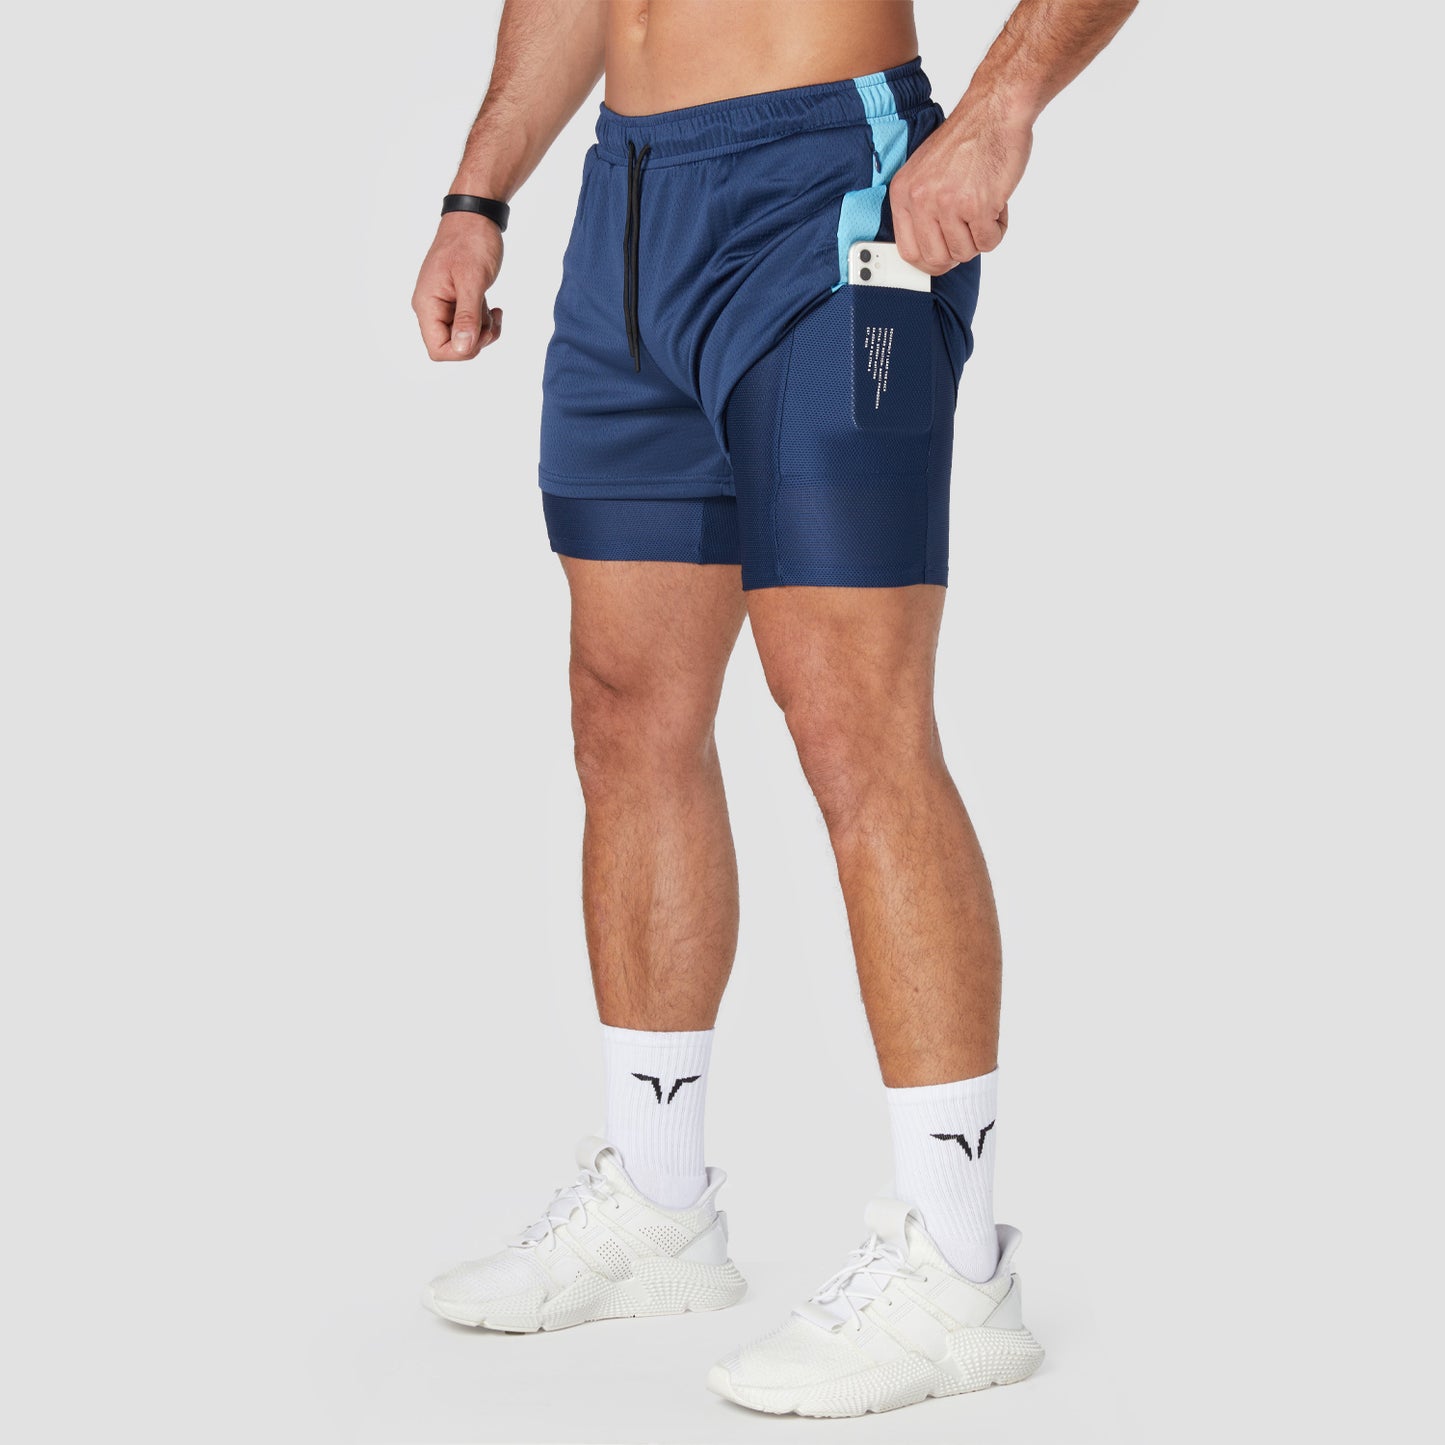 squatwolf-gym-wear-hybrid-performance-2-in-1-shorts-navy-workout-shorts-for-men